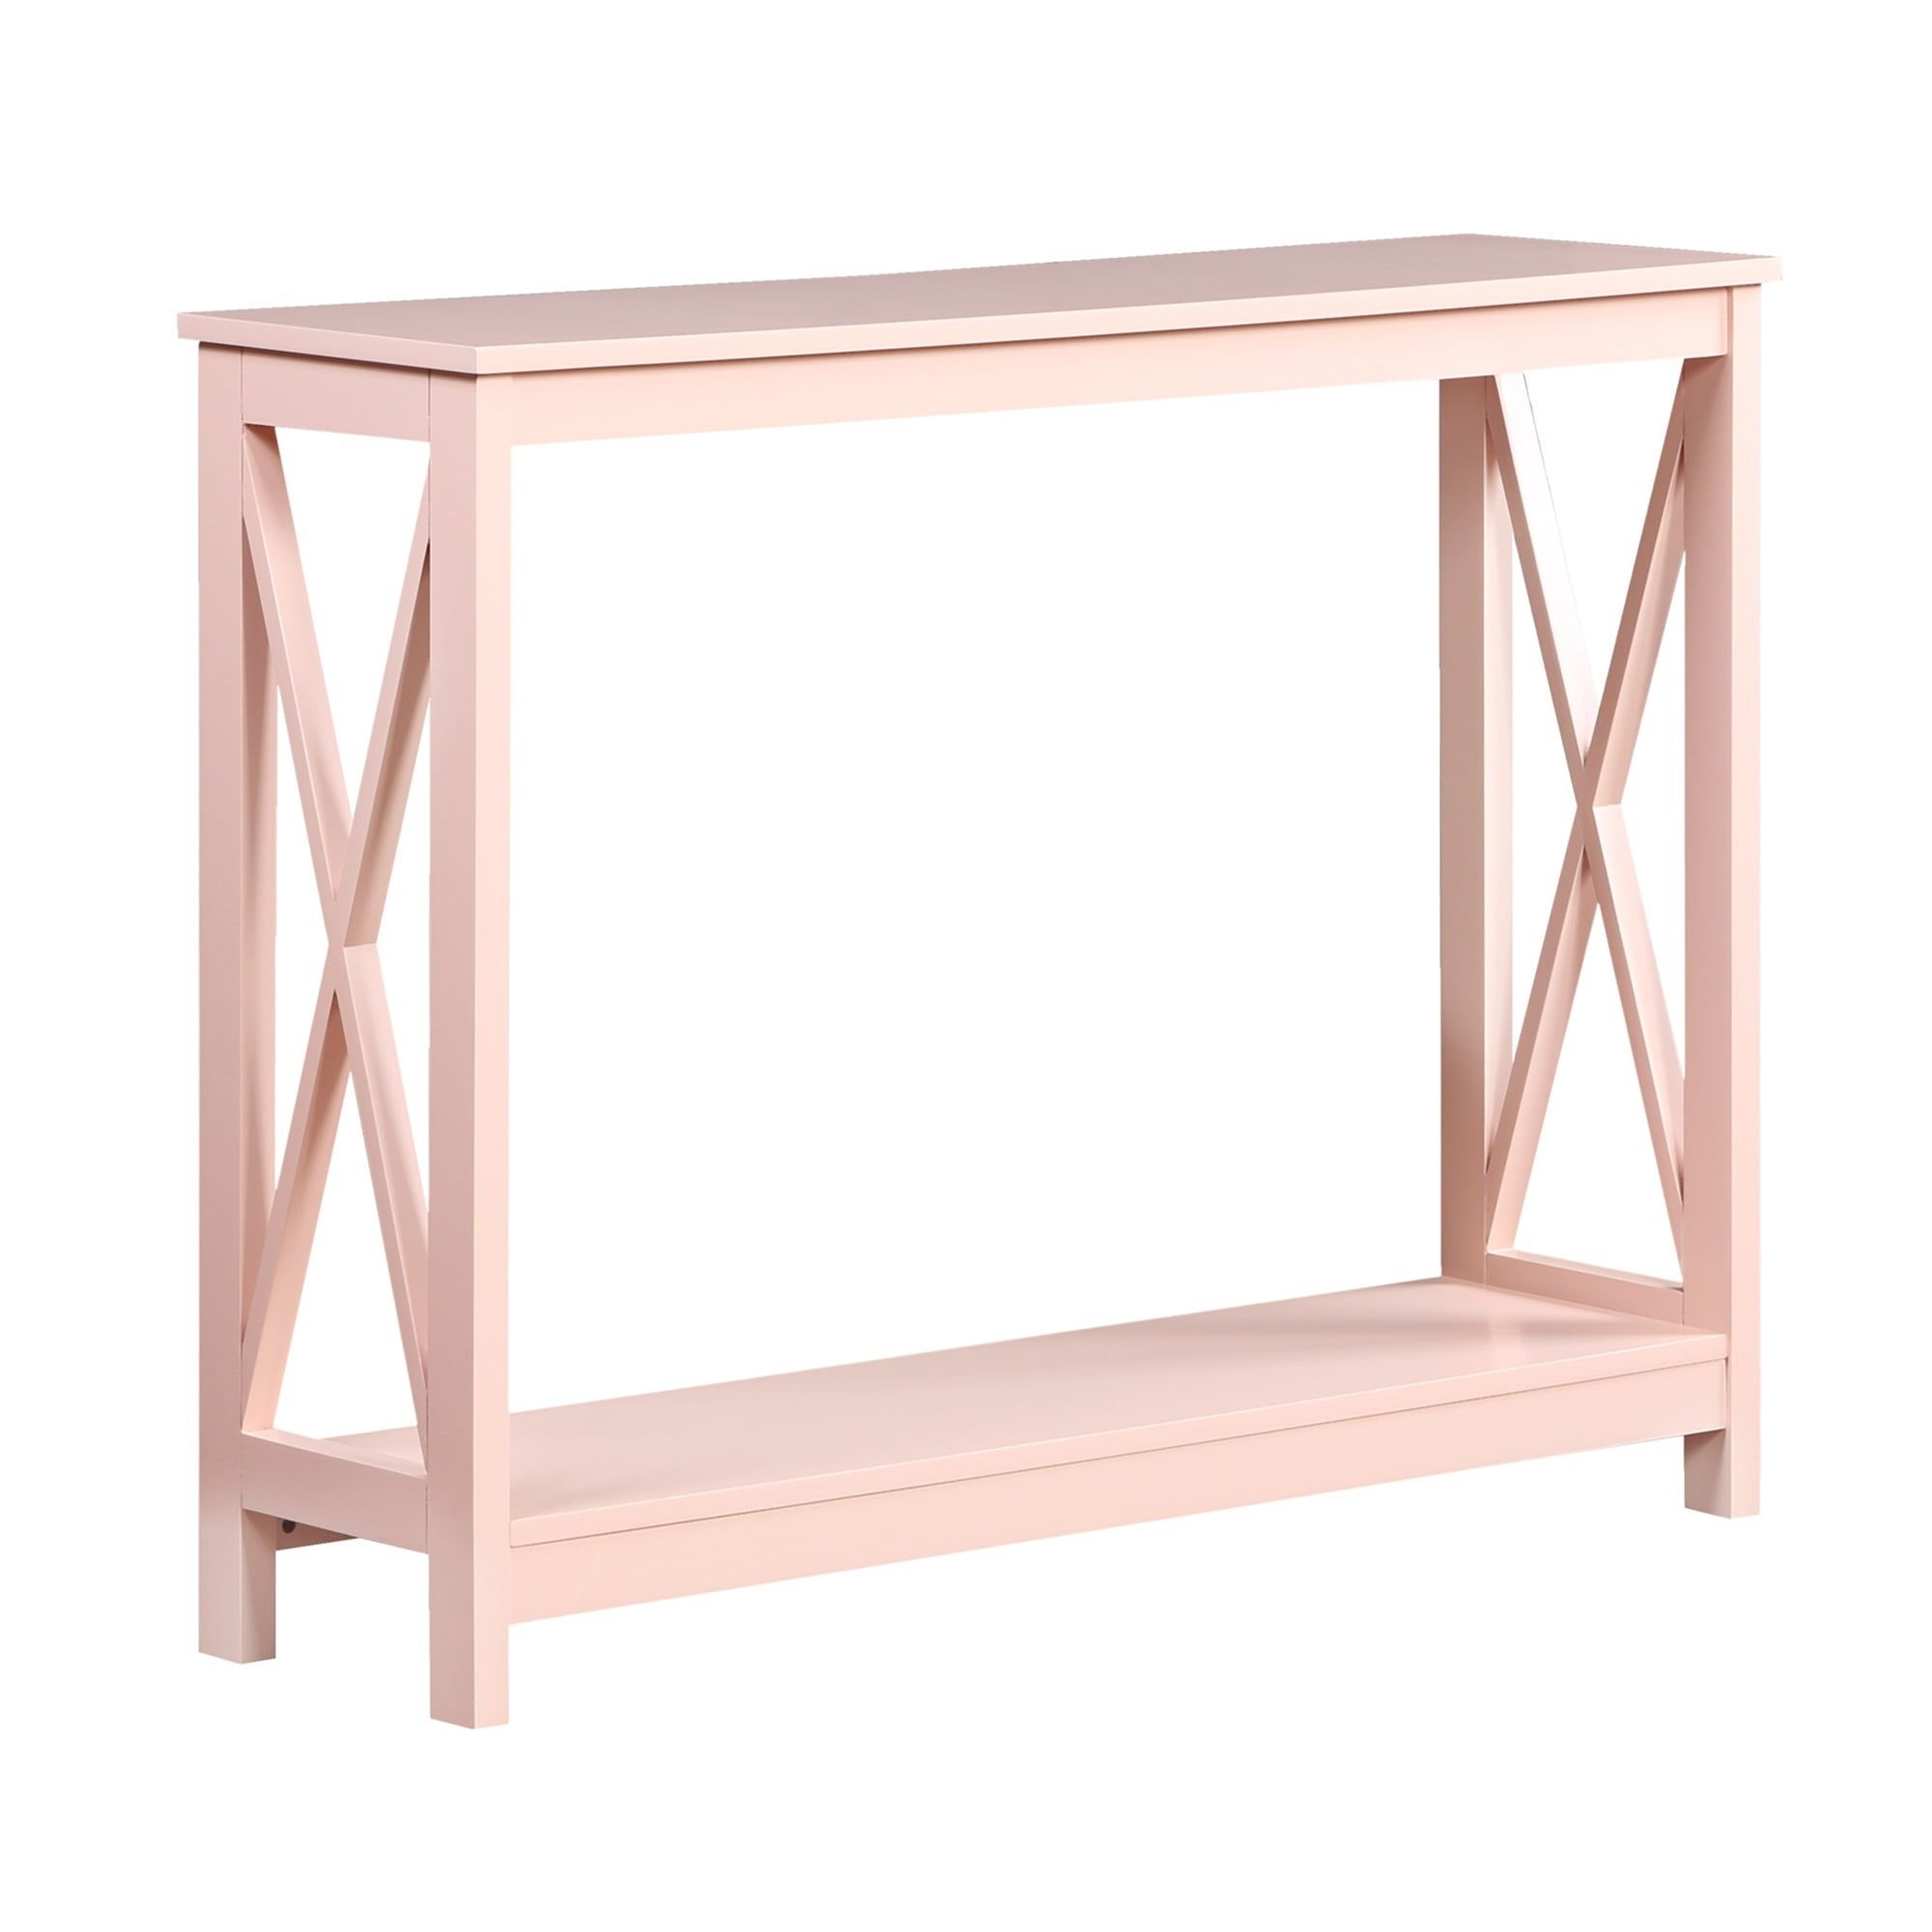 Blush Pink Oxford Console Table with Dual-Tiered Shelves